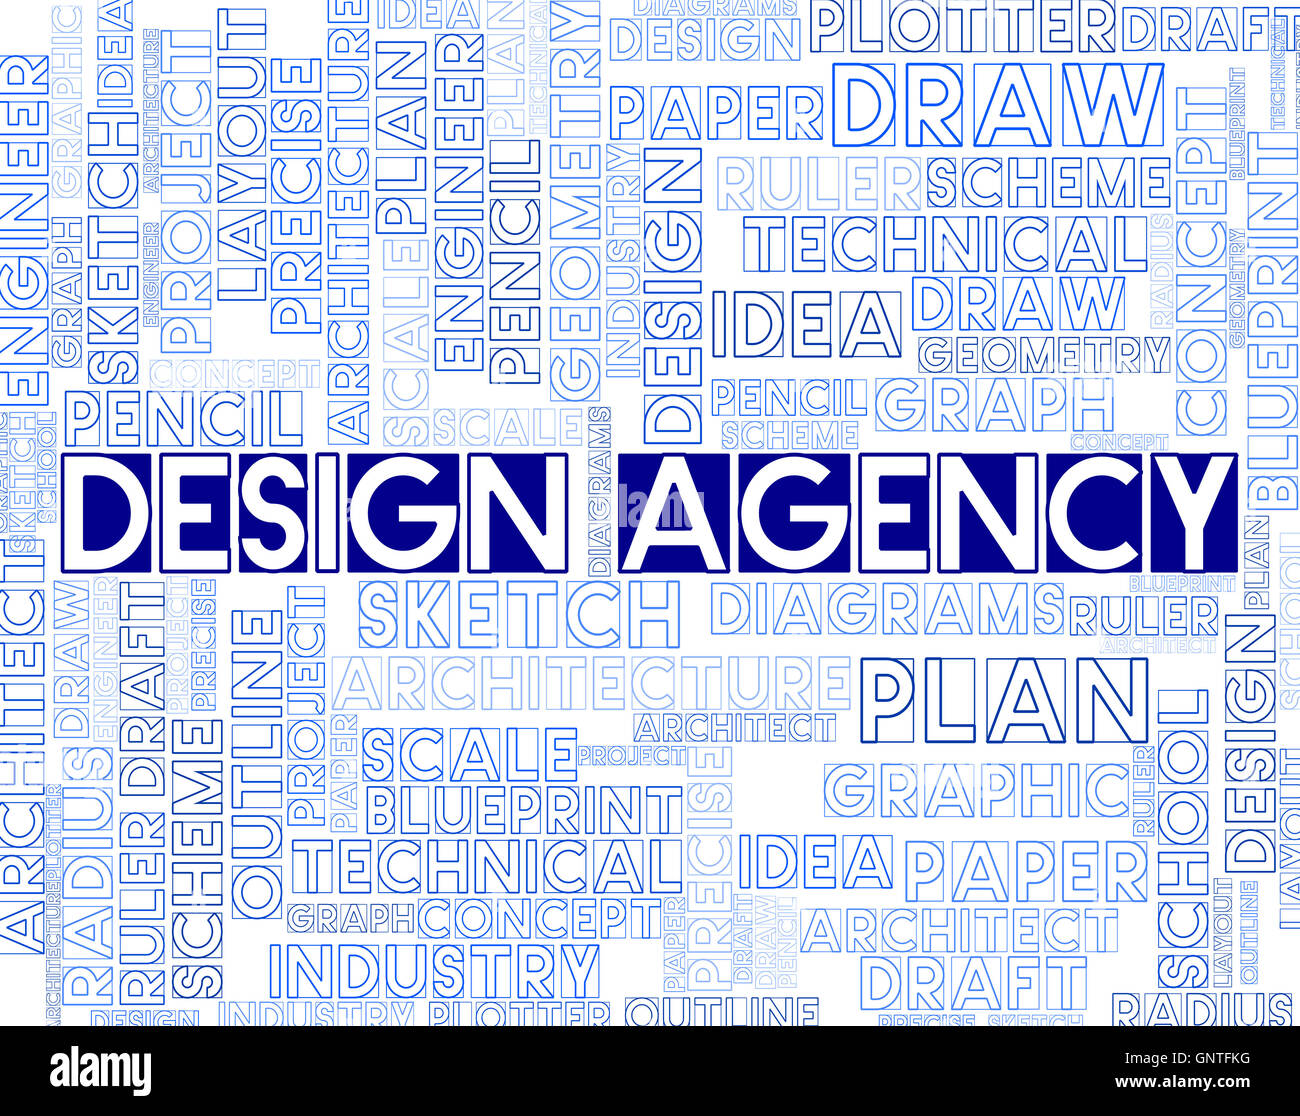 Design Agency Meaning Artwork And Creative Agents Stock Photo